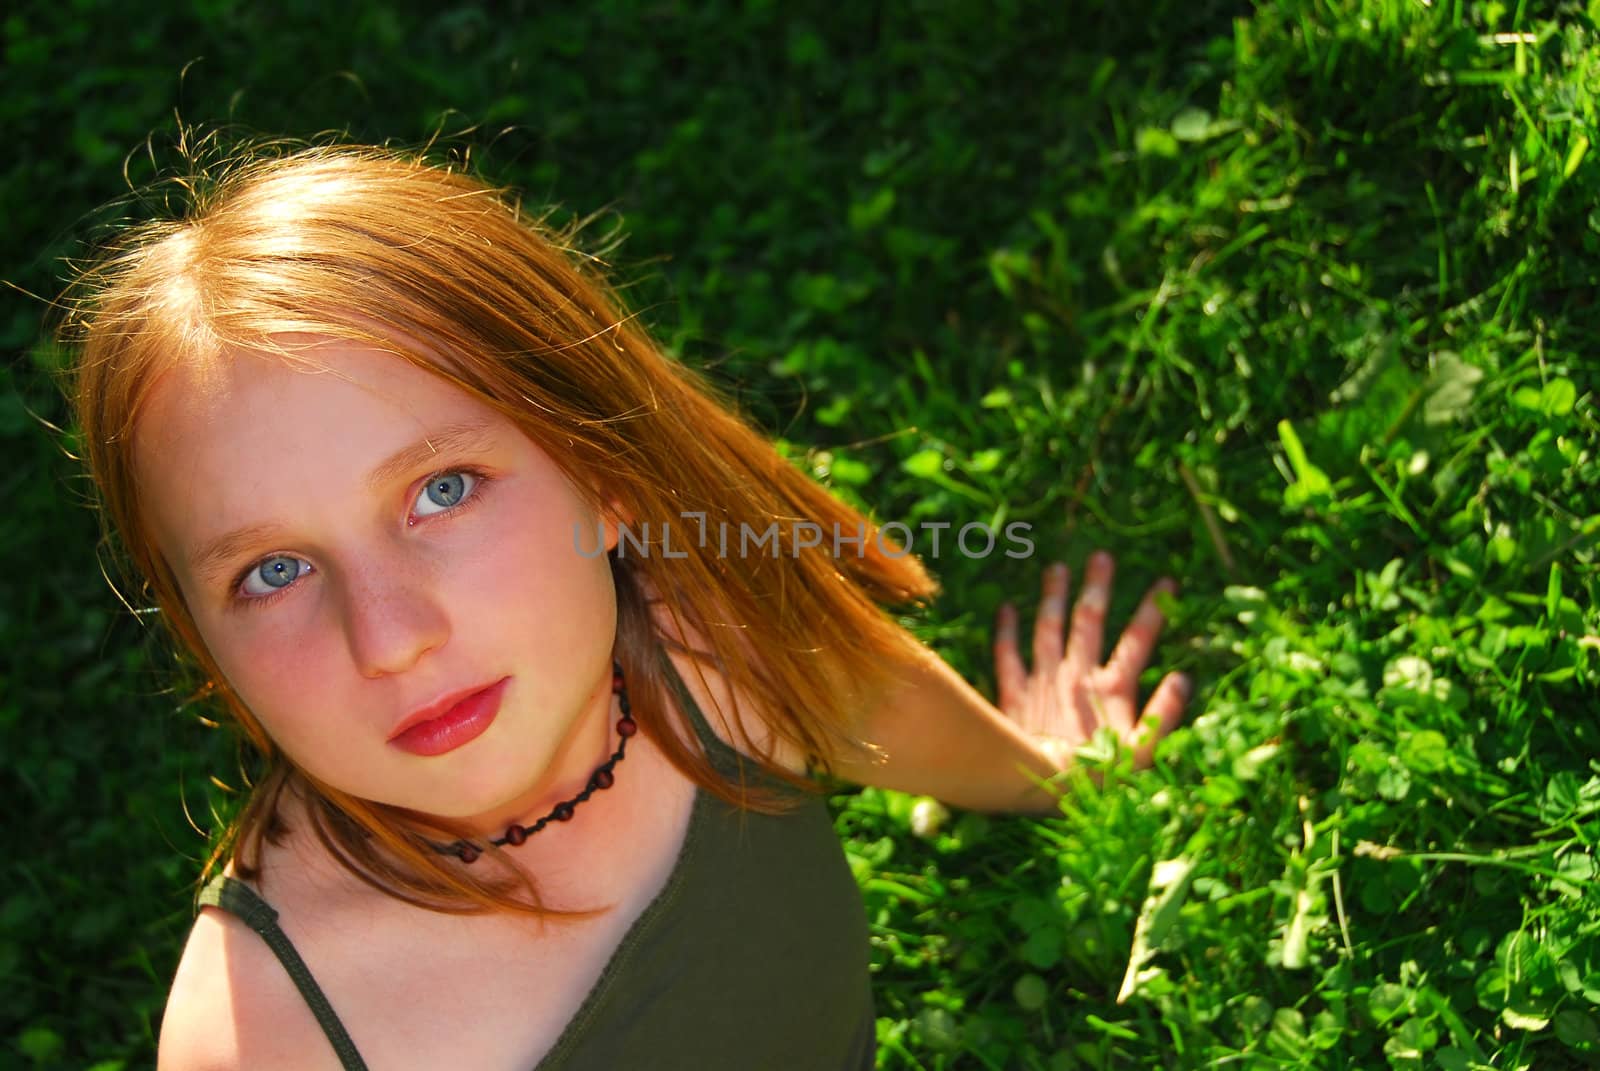 Young pretty girl sitting on green grass outside